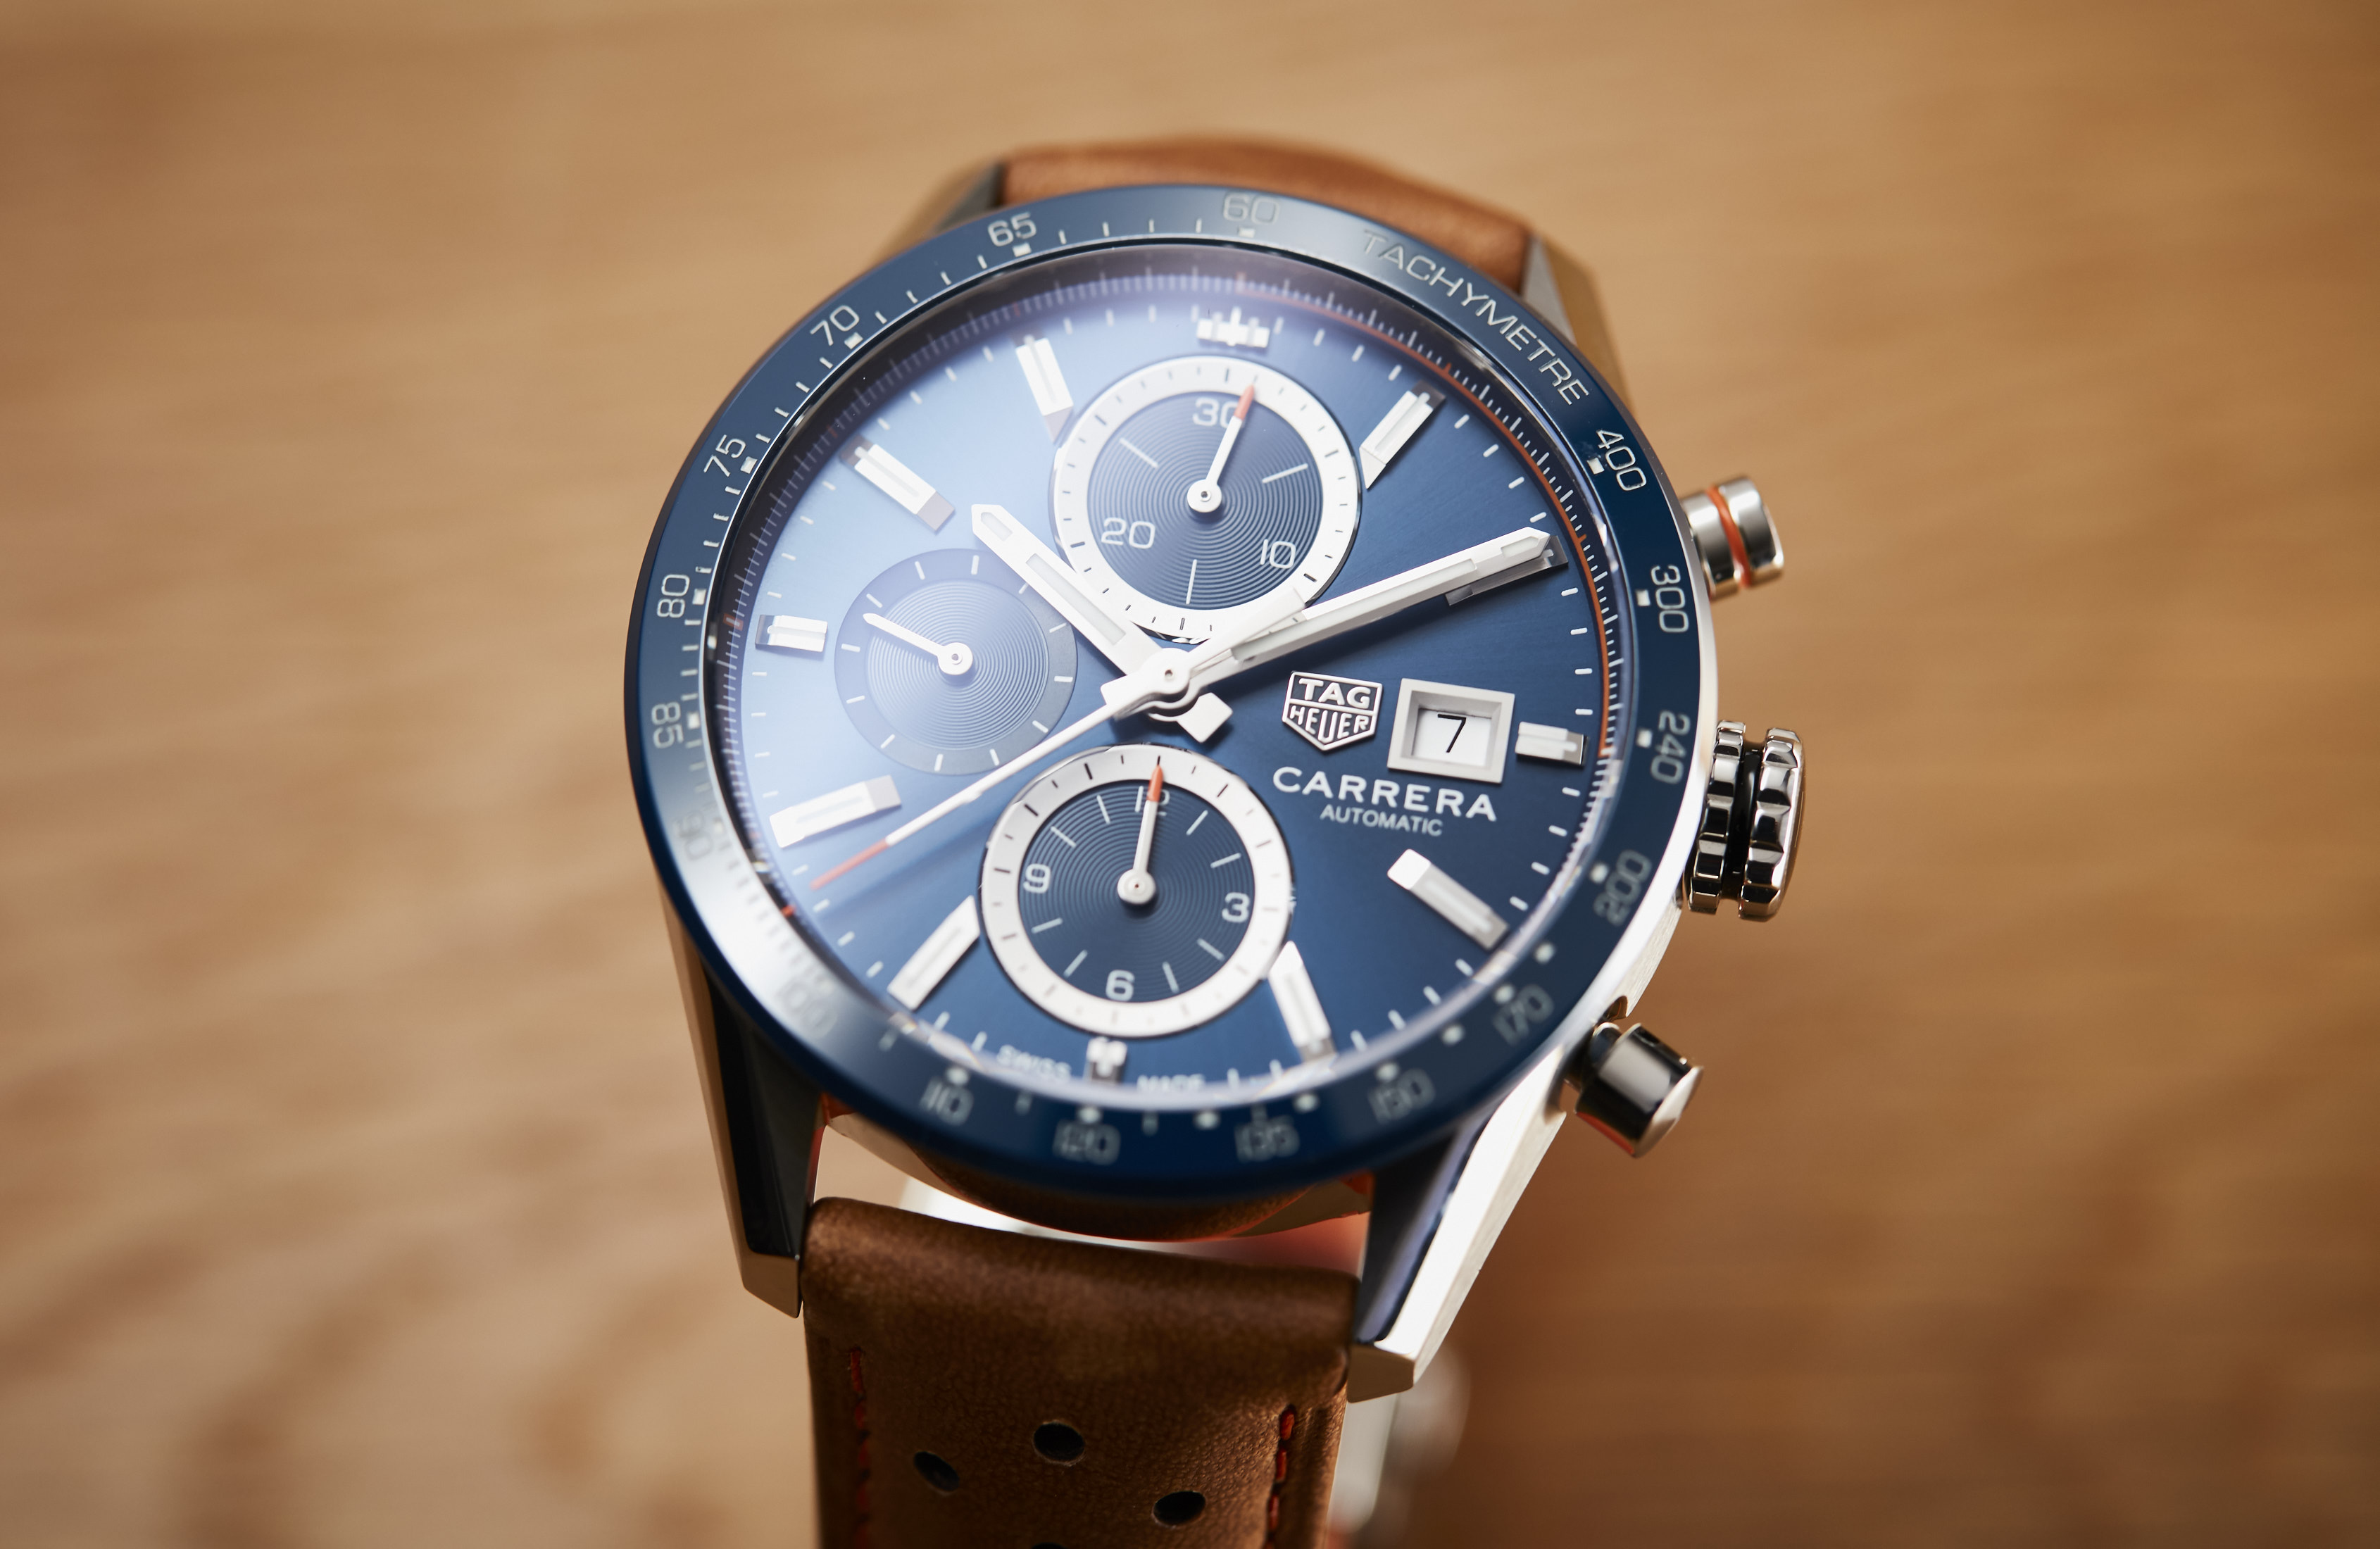 IN-DEPTH: The TAG Heuer Carrera Calibre 16 blue dial - Time and Tide Watches